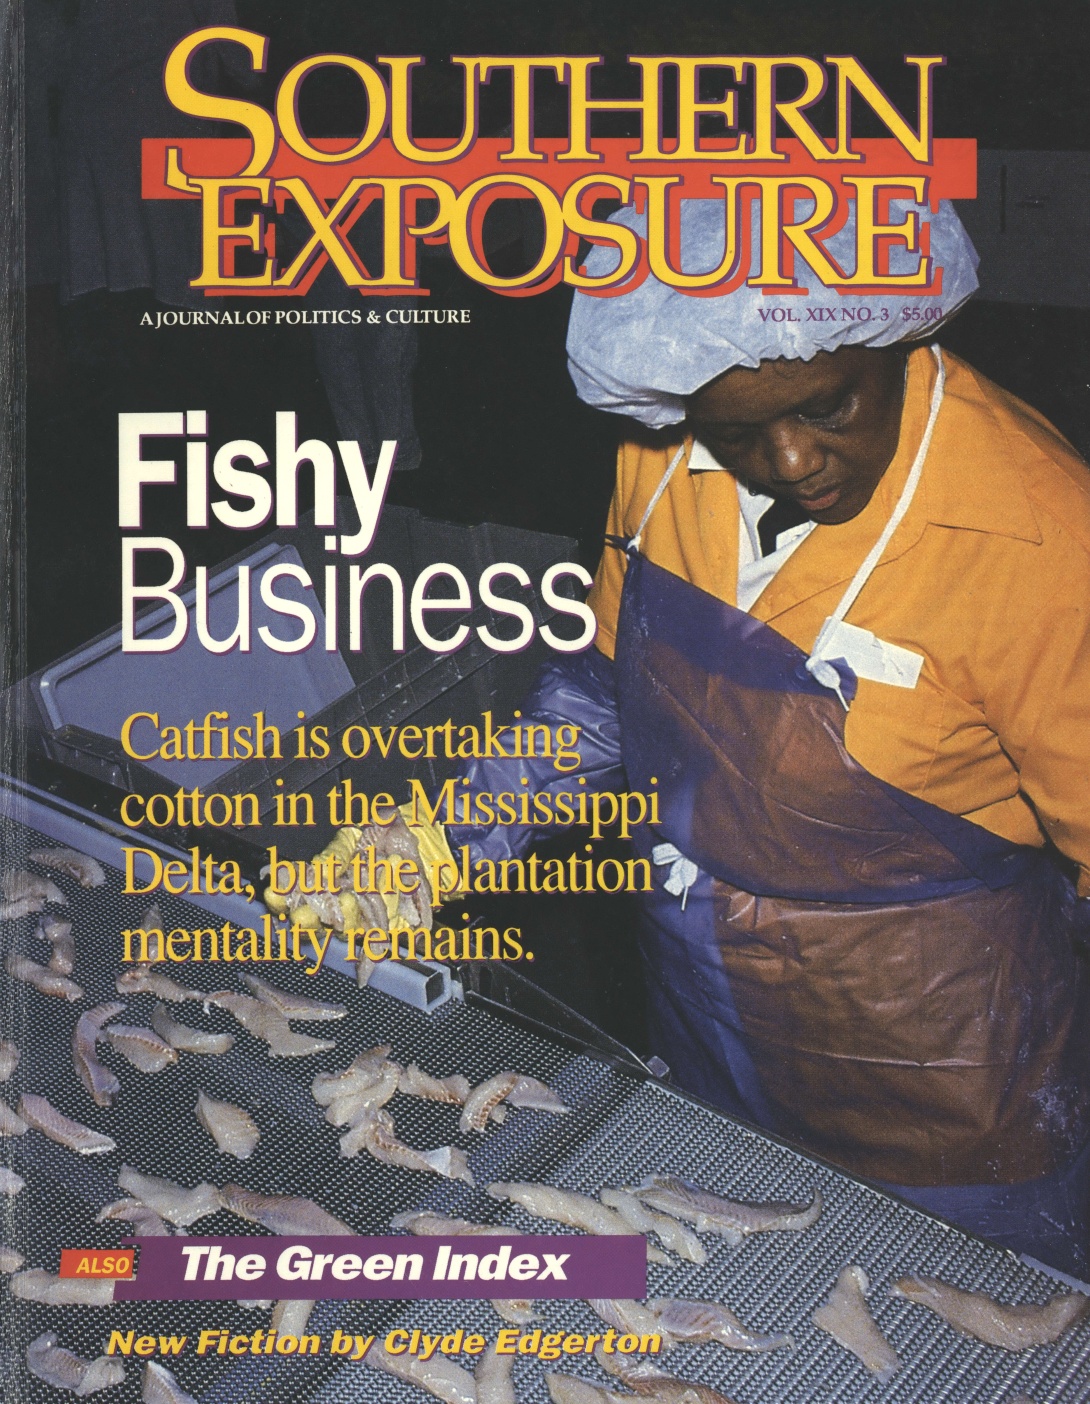 Magazine cover with worker in hair net and gloves that reads "Fishy Business"